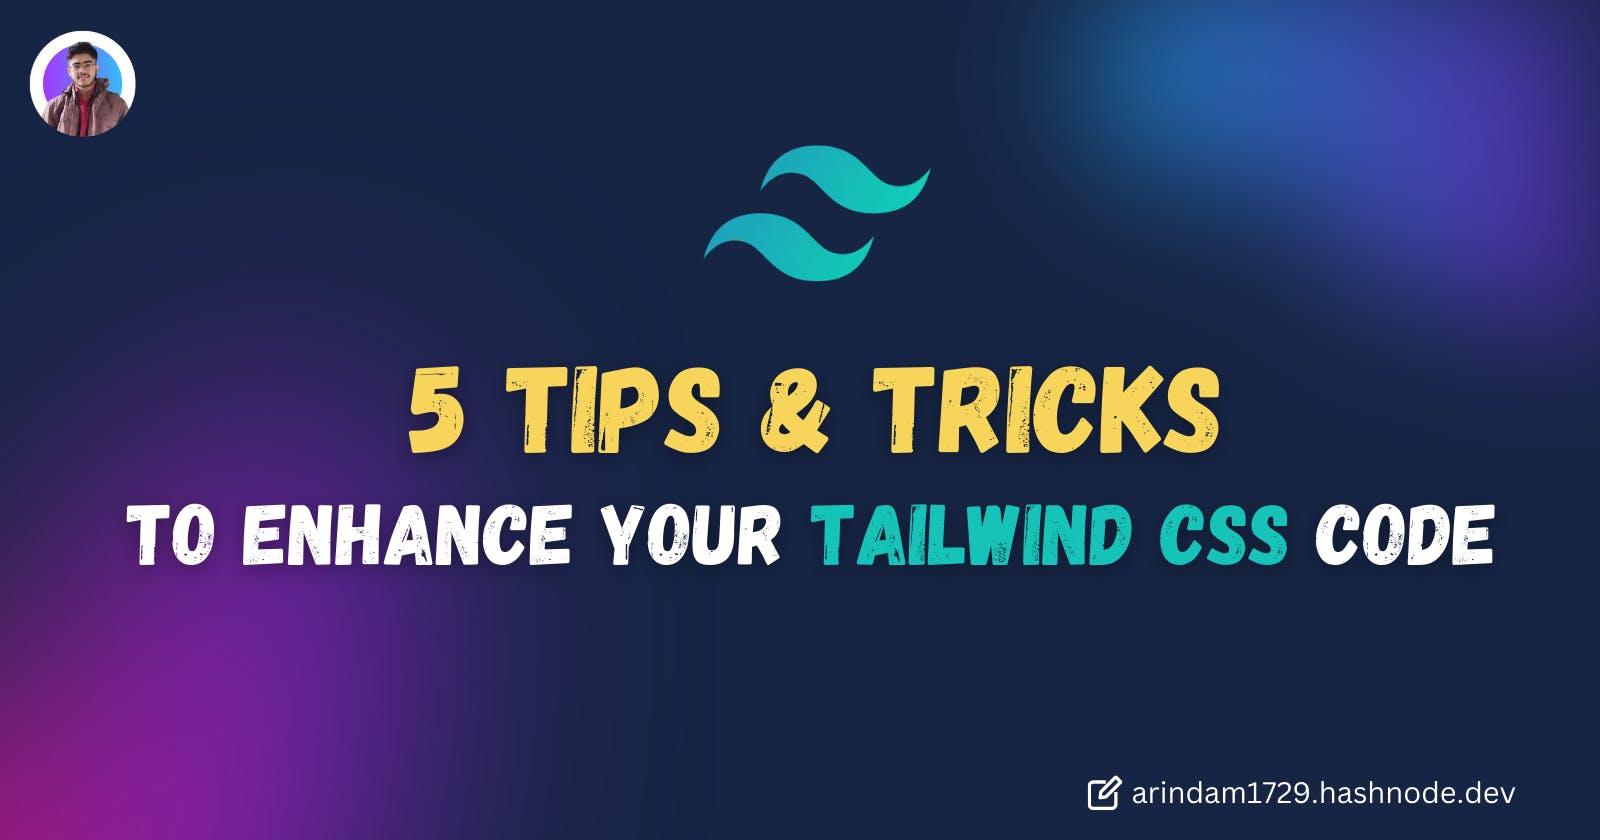 5 Tips & Tricks to Enhance Your Tailwind CSS Code